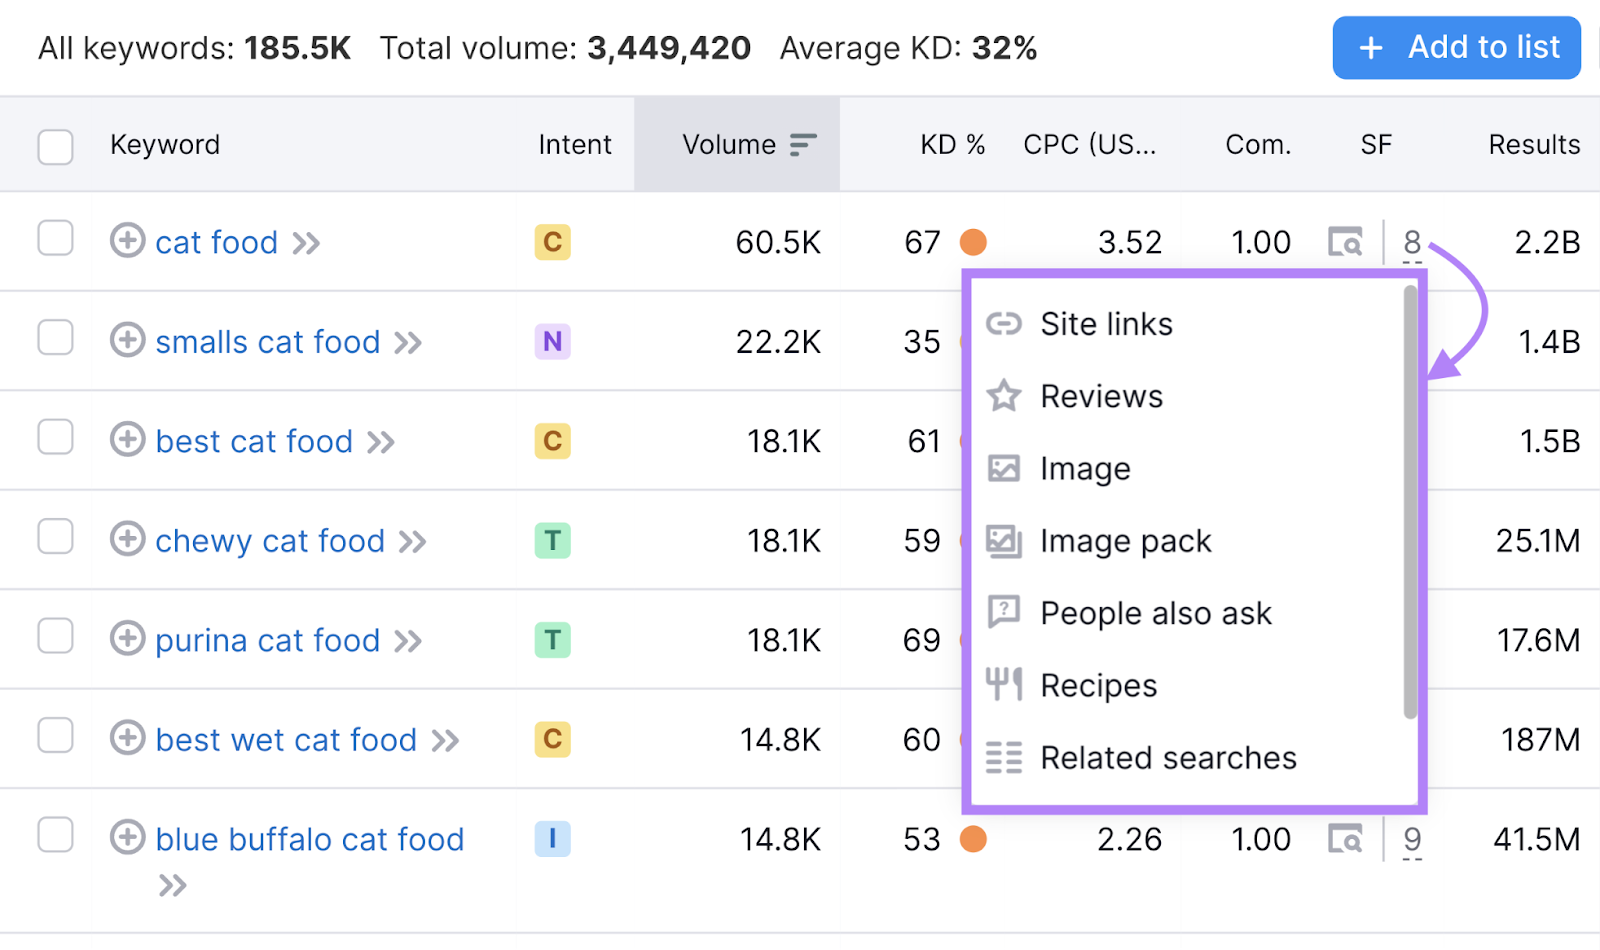 Semrush gives you an overview of how many SERP features each keyword triggers